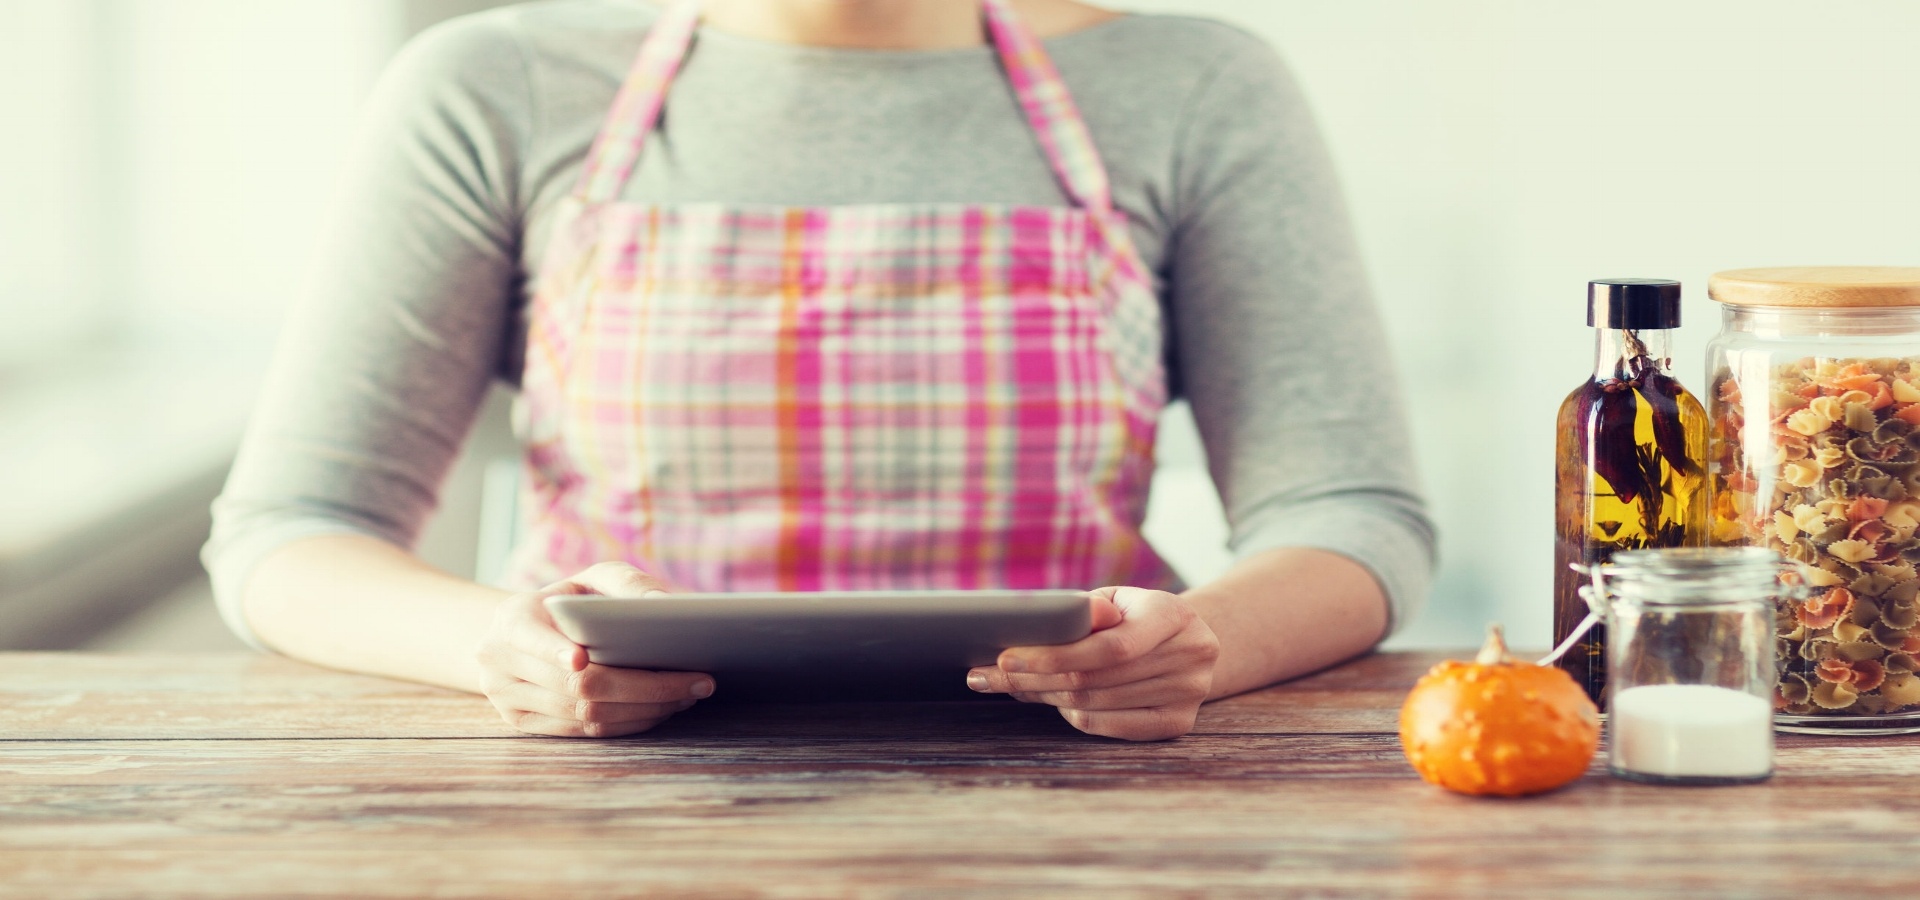 Woman in apron looking at computer tablet